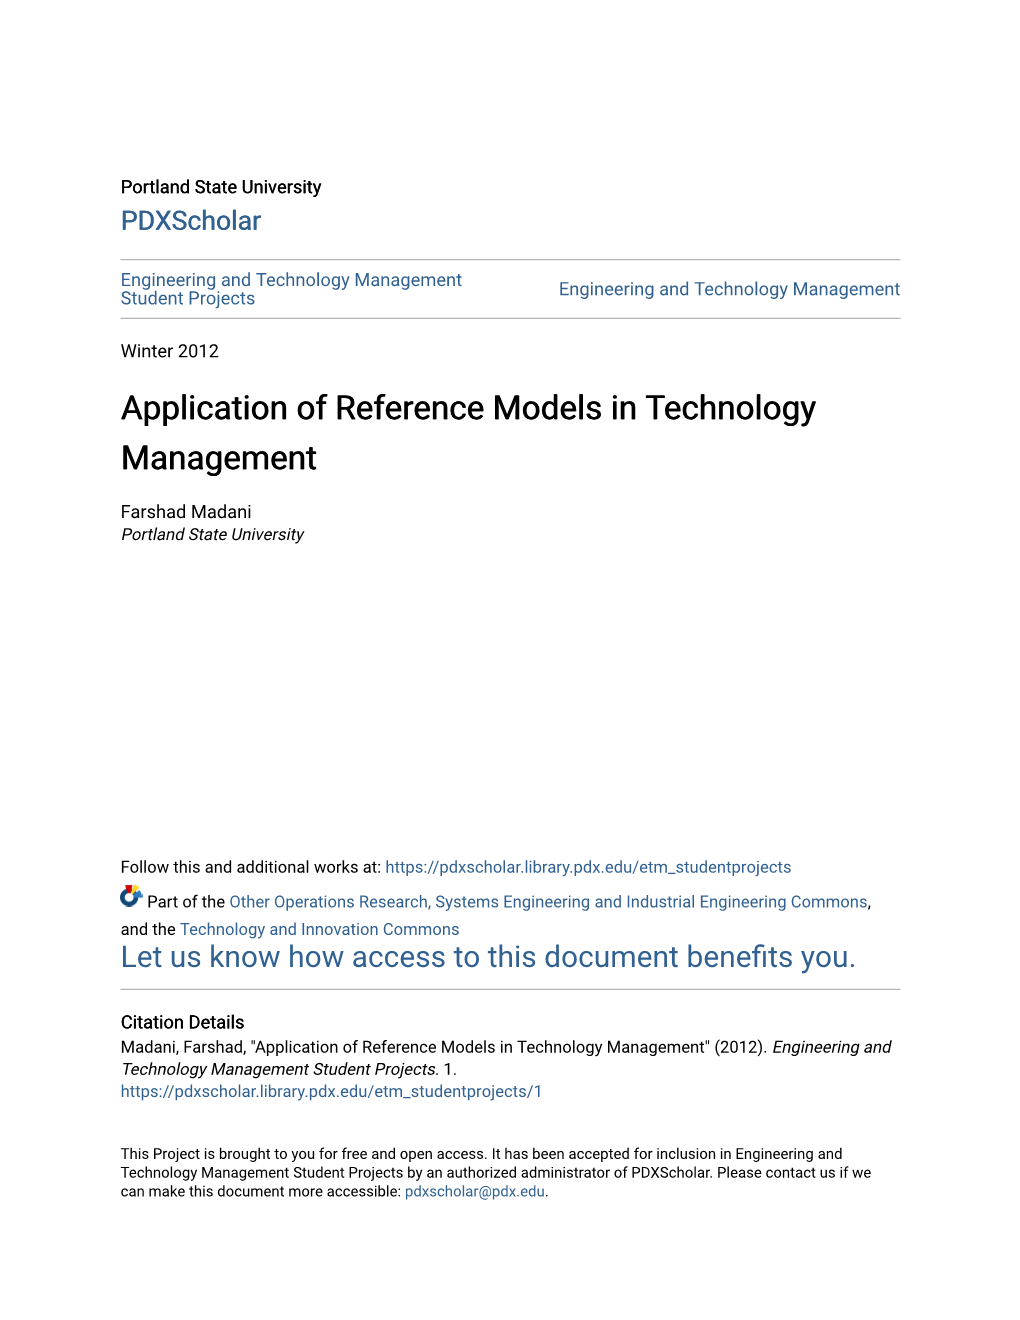 Application of Reference Models in Technology Management